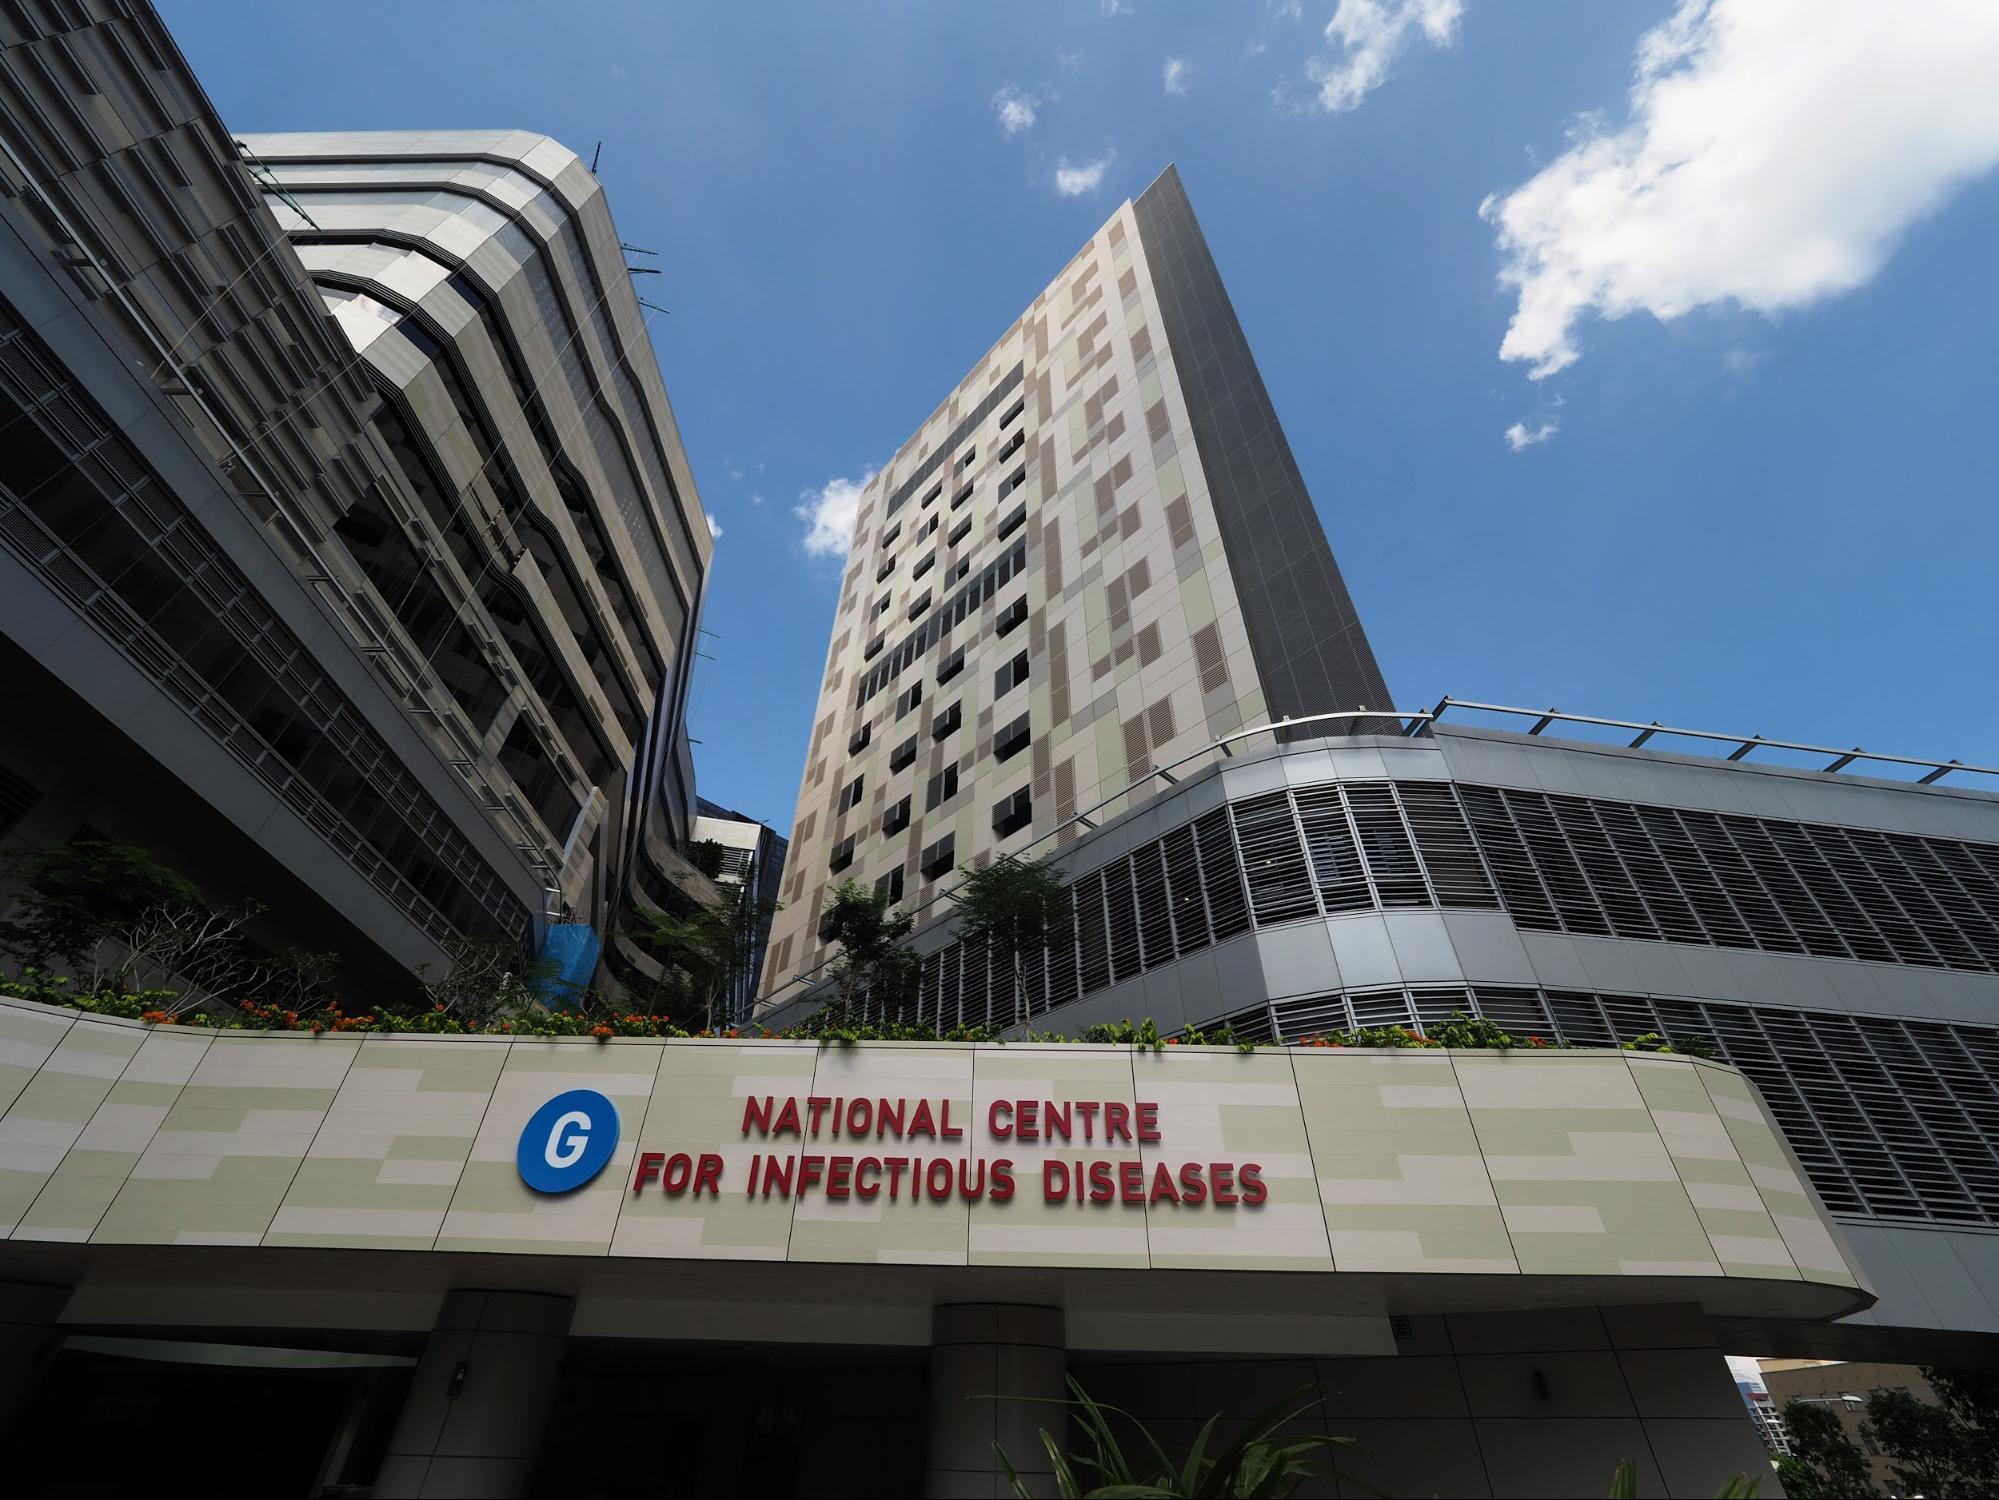 The National Centre for Infectious Diseases is the facility capable of housing the largest number of coronavirus patients